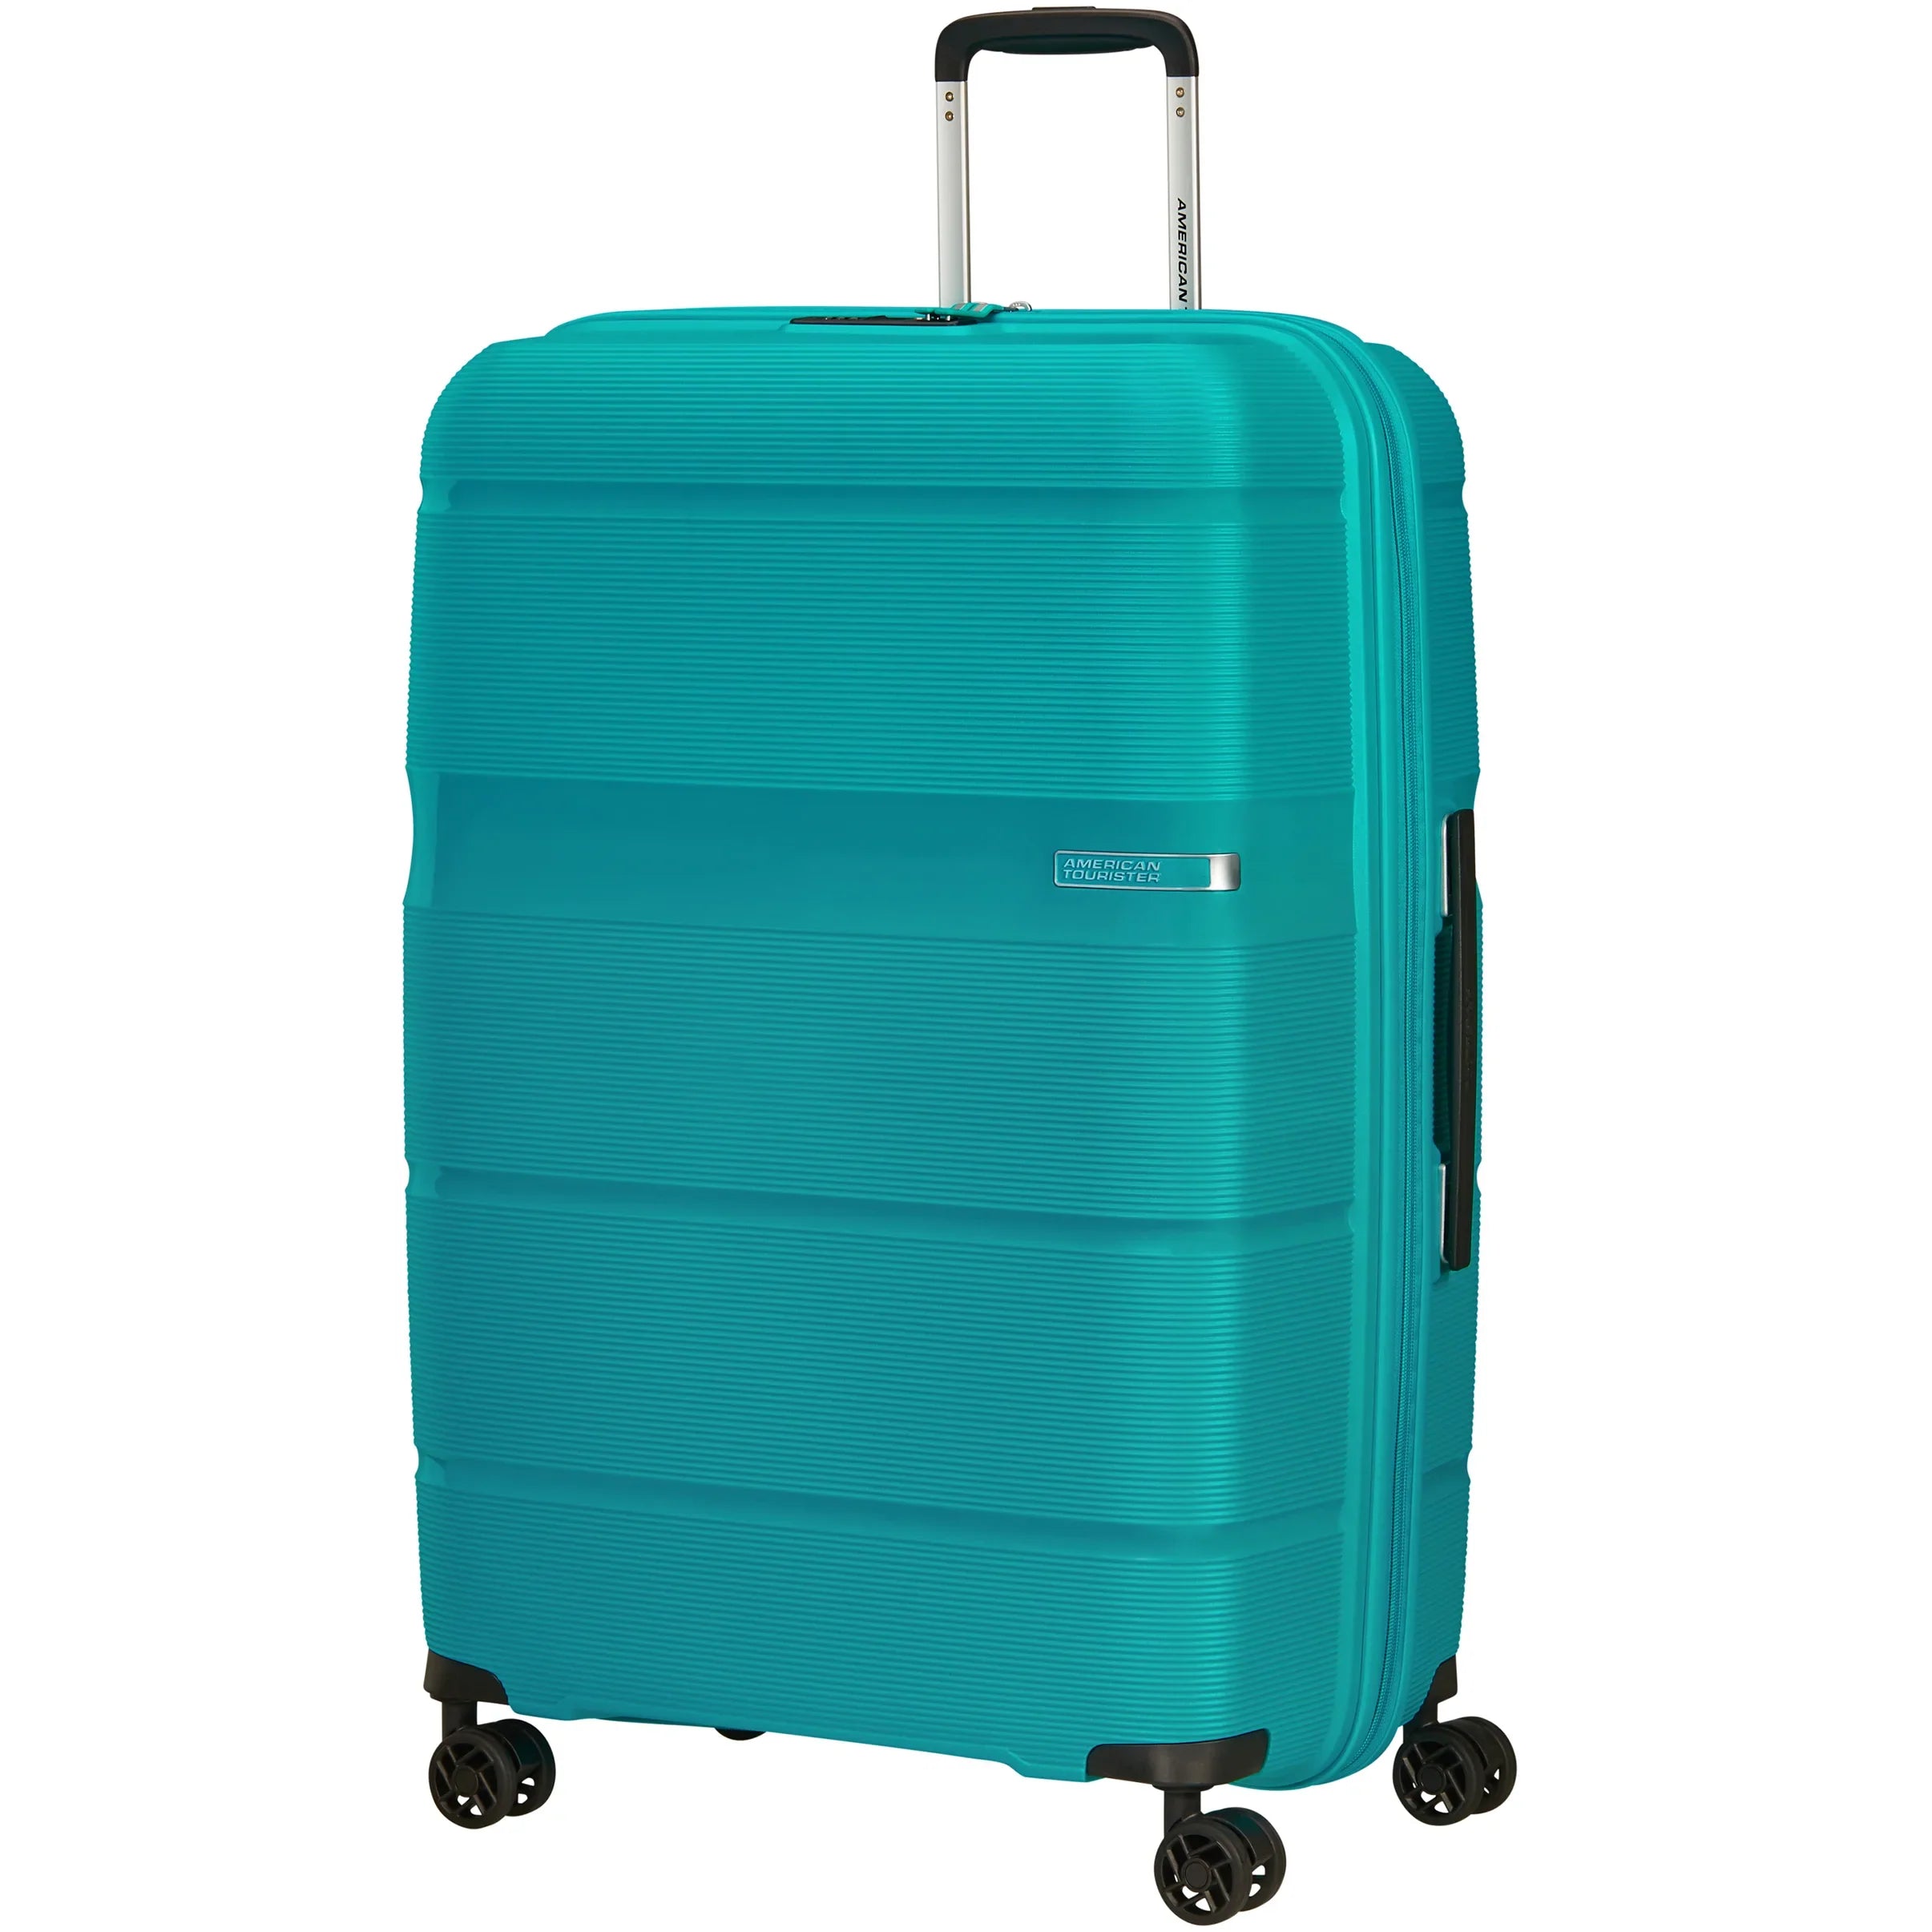 American Tourister Koffer & 5 – Seite Trolleys